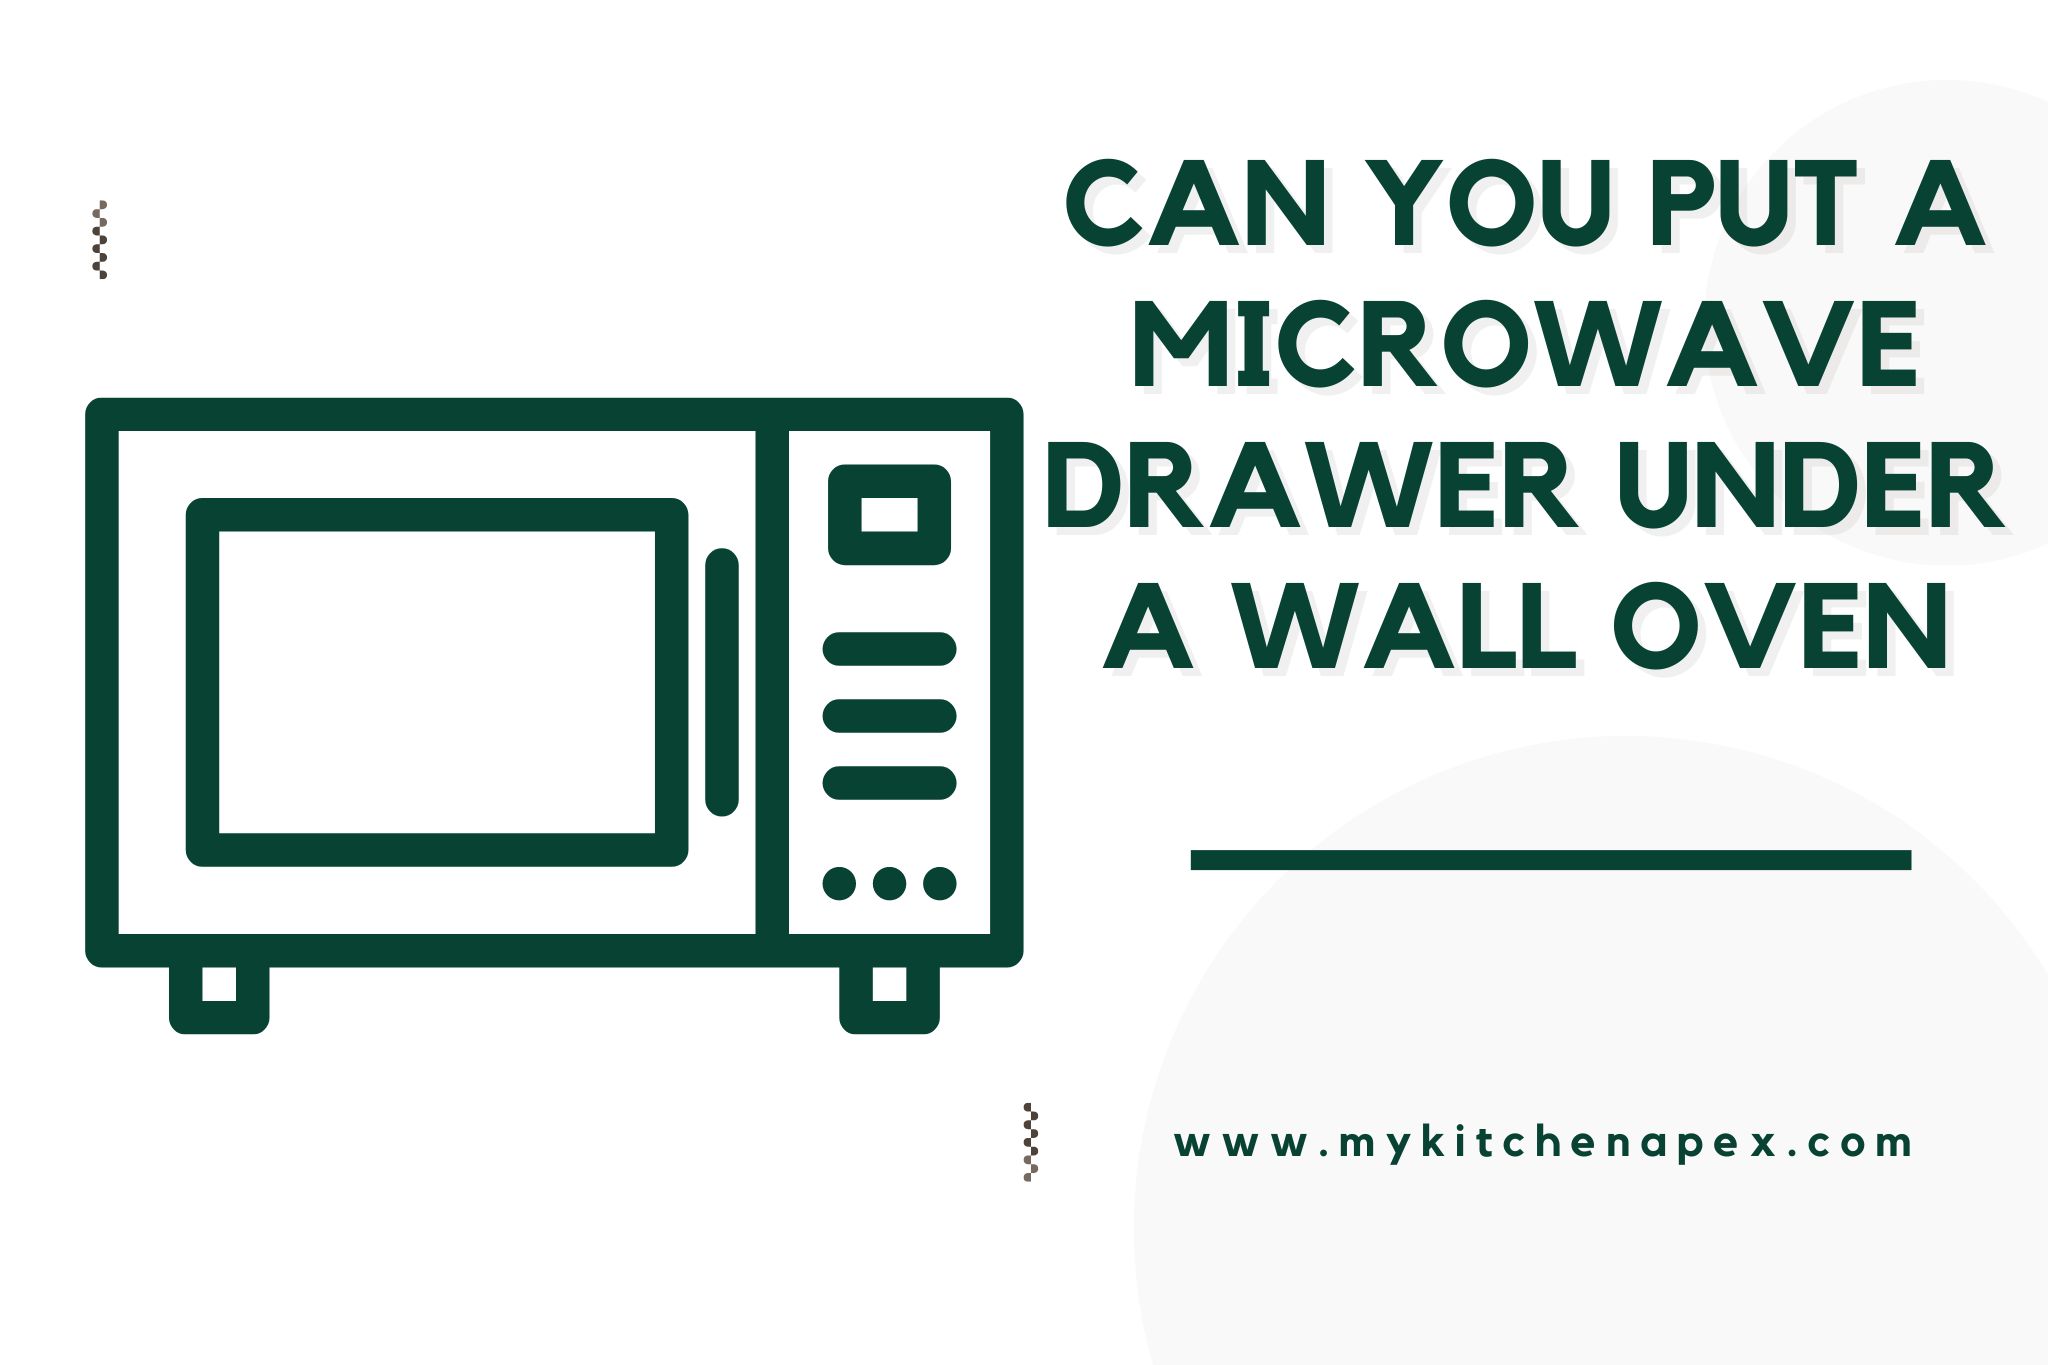 can you put a microwave drawer under a wall oven